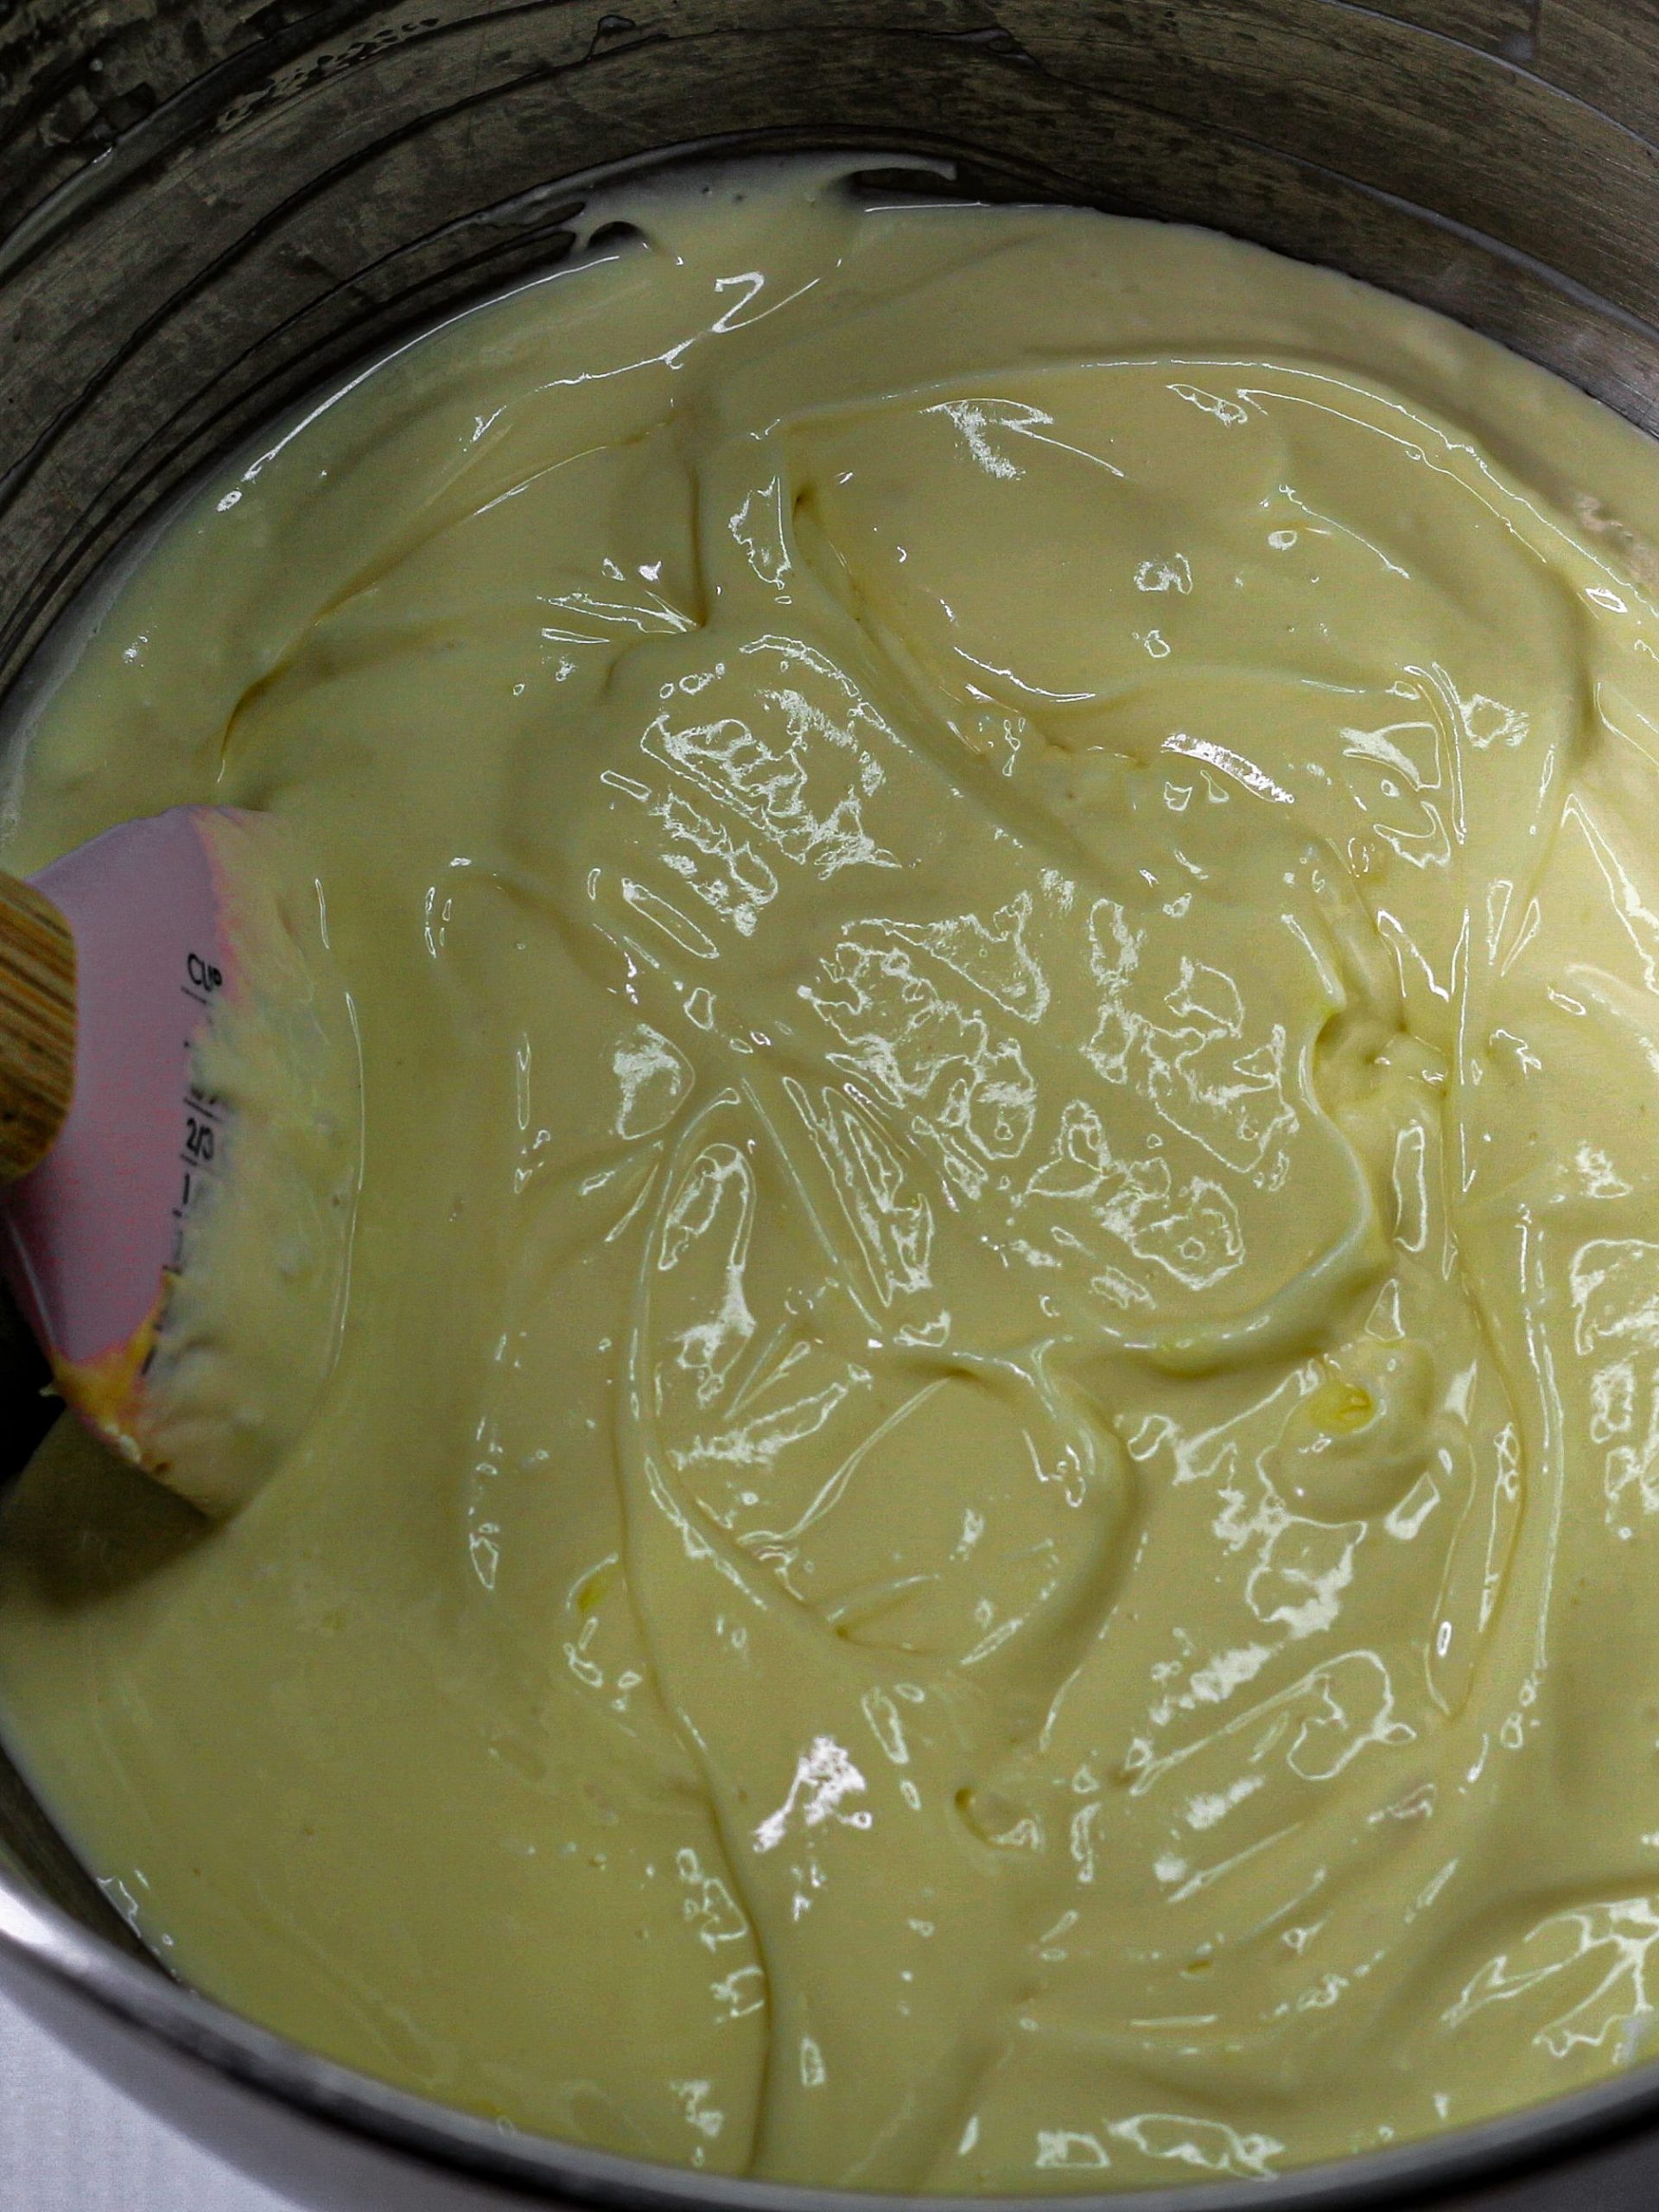 Using a medium bowl, whisk together the evaporated milk and pudding mix until combined and thick for about 2 minutes